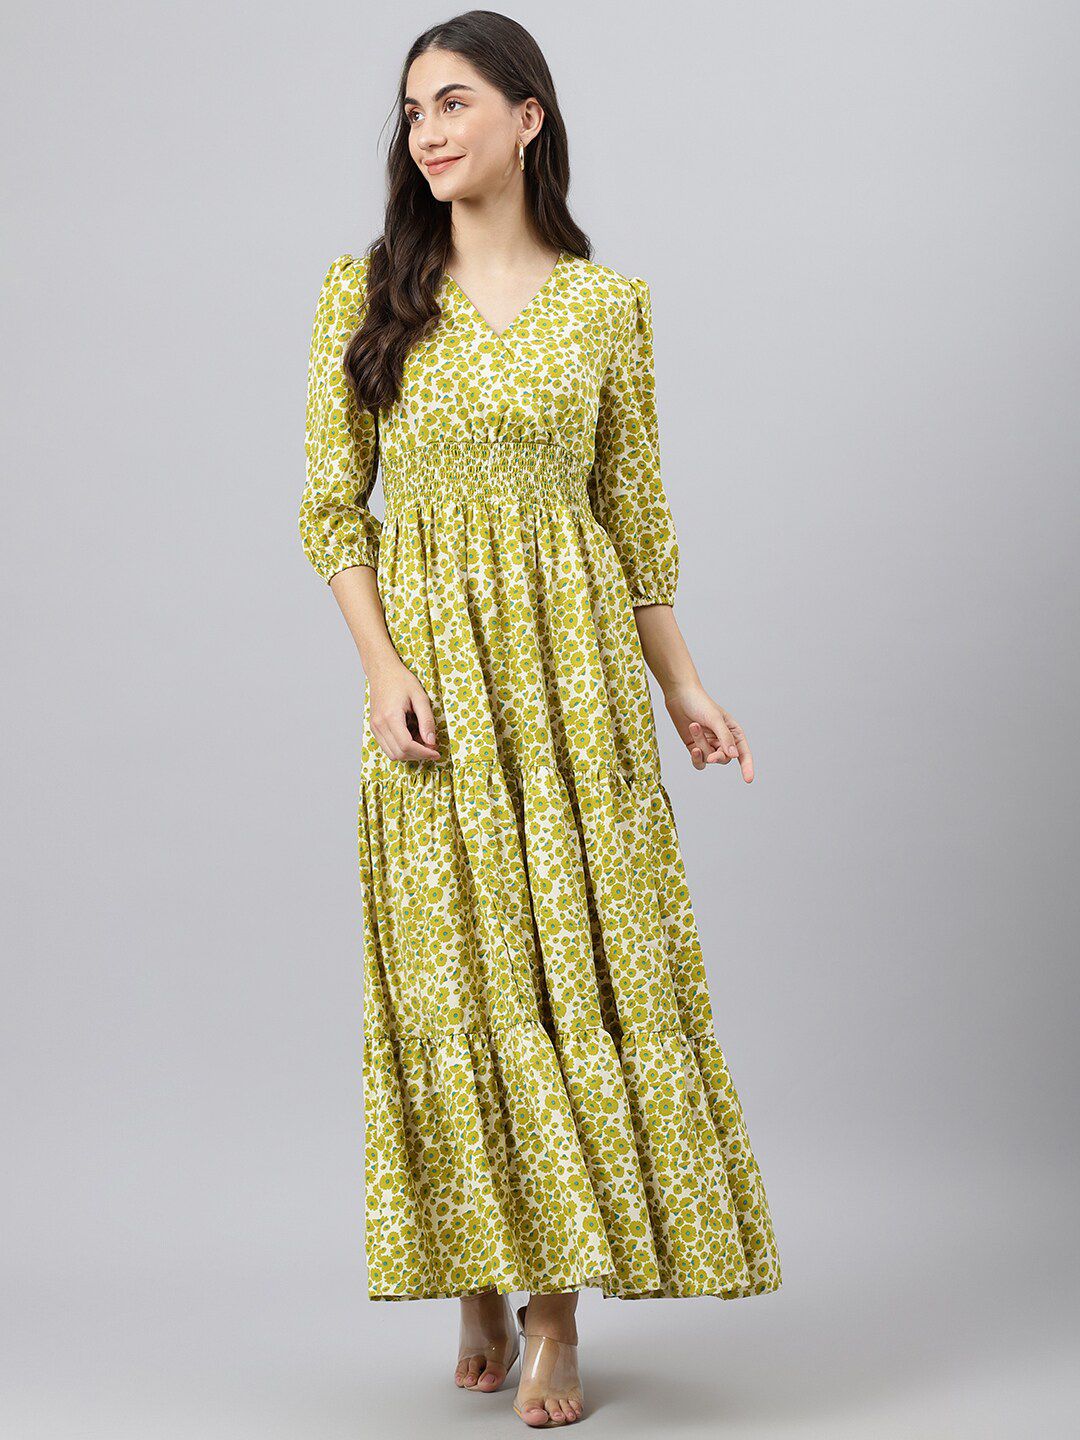 DEEBACO Women Green Floral Printed V-Neck Maxi Dress Price in India